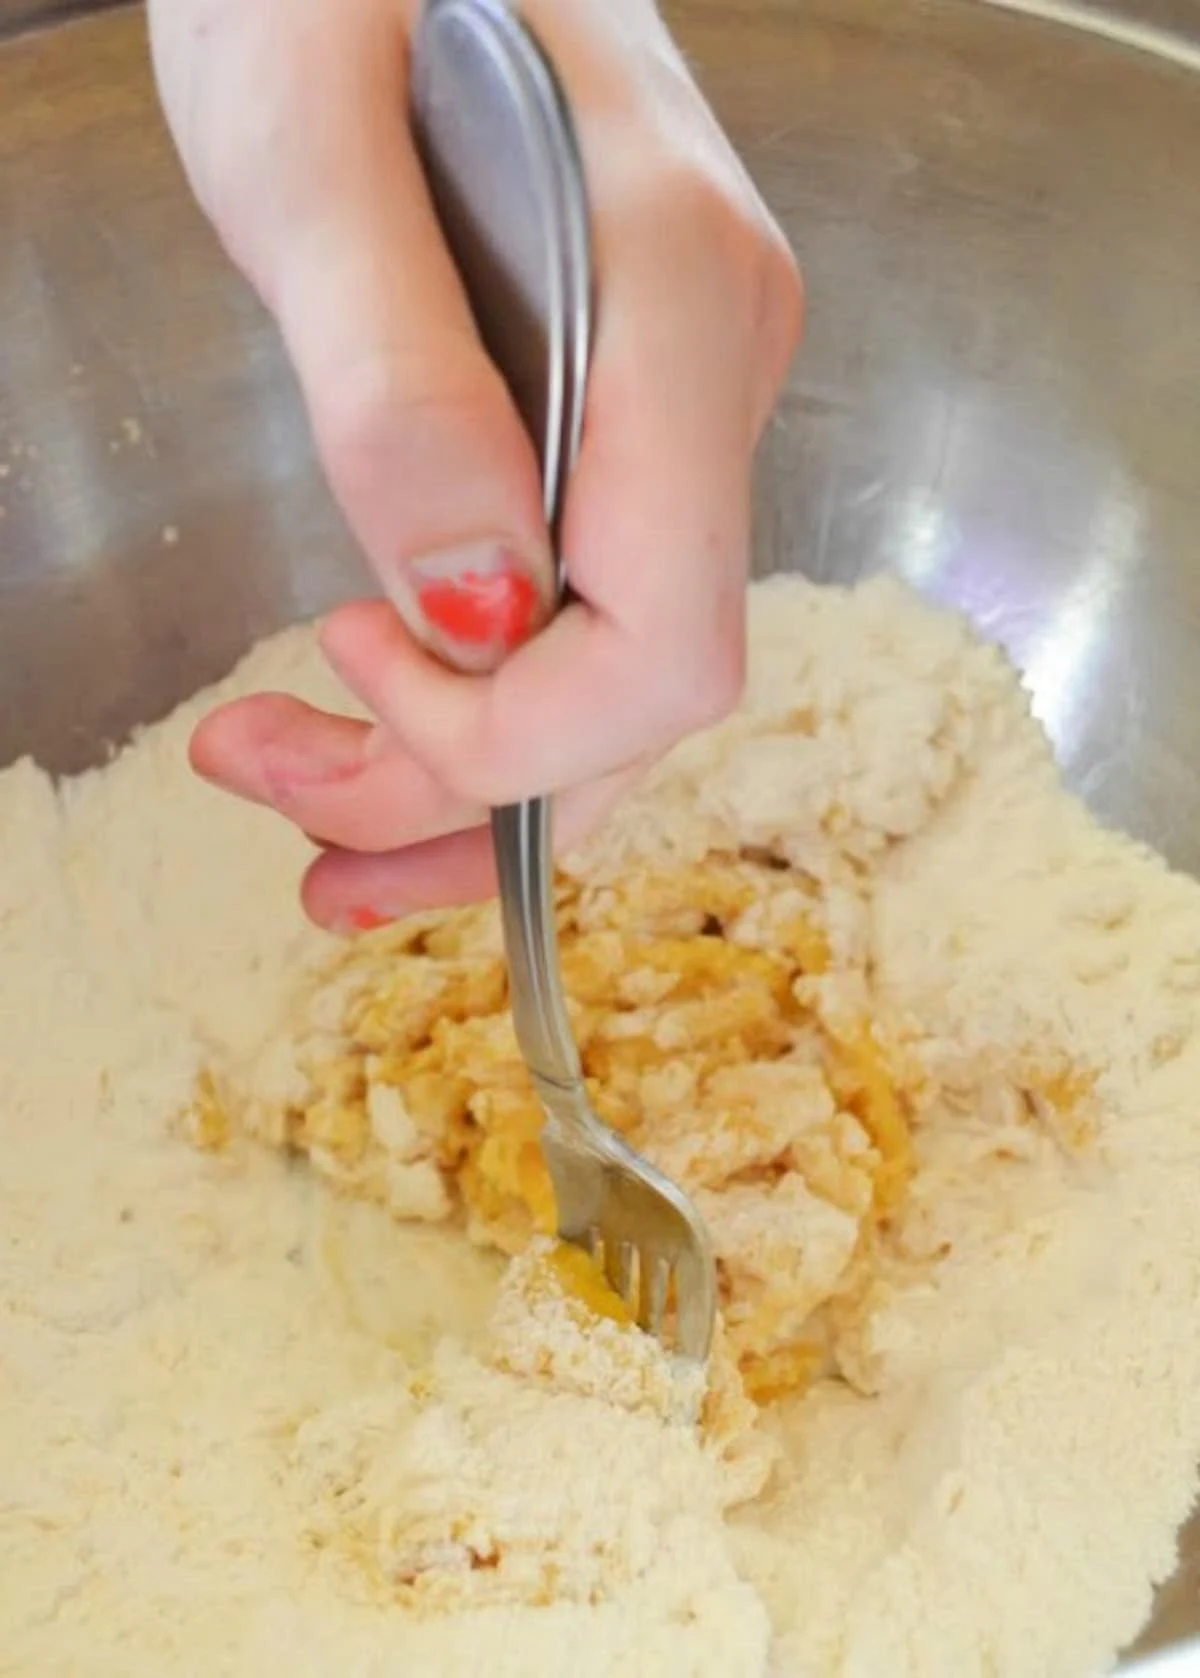 Egg and Vanilla being stirred in with flour in a mixing bowl using a fork.